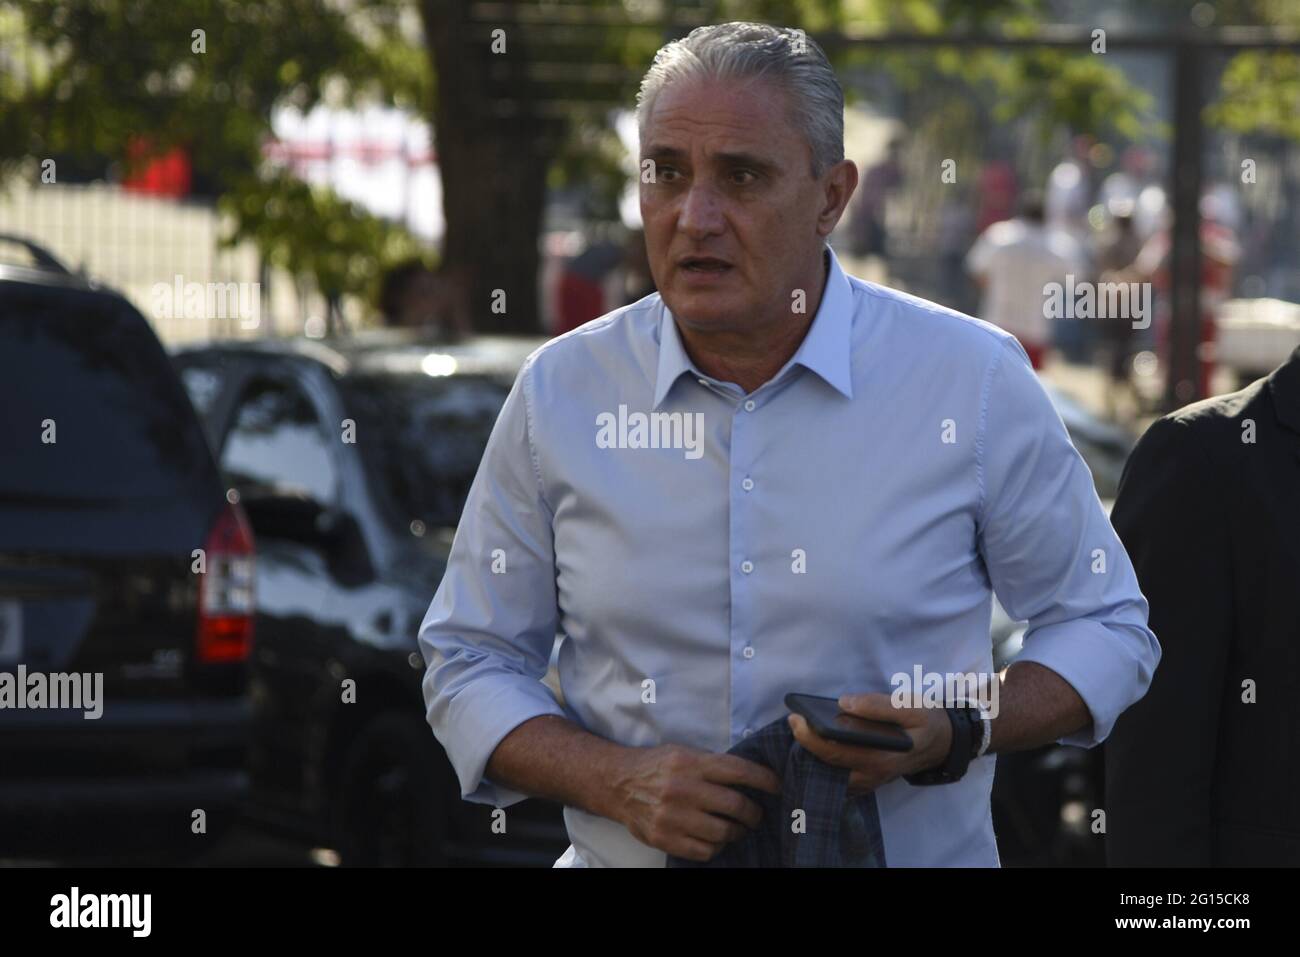 Manager of Brazilian national football team (men) Adenor Leonardo Bachi known as 'Tite' is rumoured to be resigning his position after the World Cup qulaifying game against Paraguay on Tuesday. In this picture Tite is arriving to watch a game between São Paulo v Santos at the Cícero Pompeu de Toledo Stadium also known as Morumbi Stadium in Sao Paulo, Brazil Credit: SPP Sport Press Photo. /Alamy Live News Stock Photo